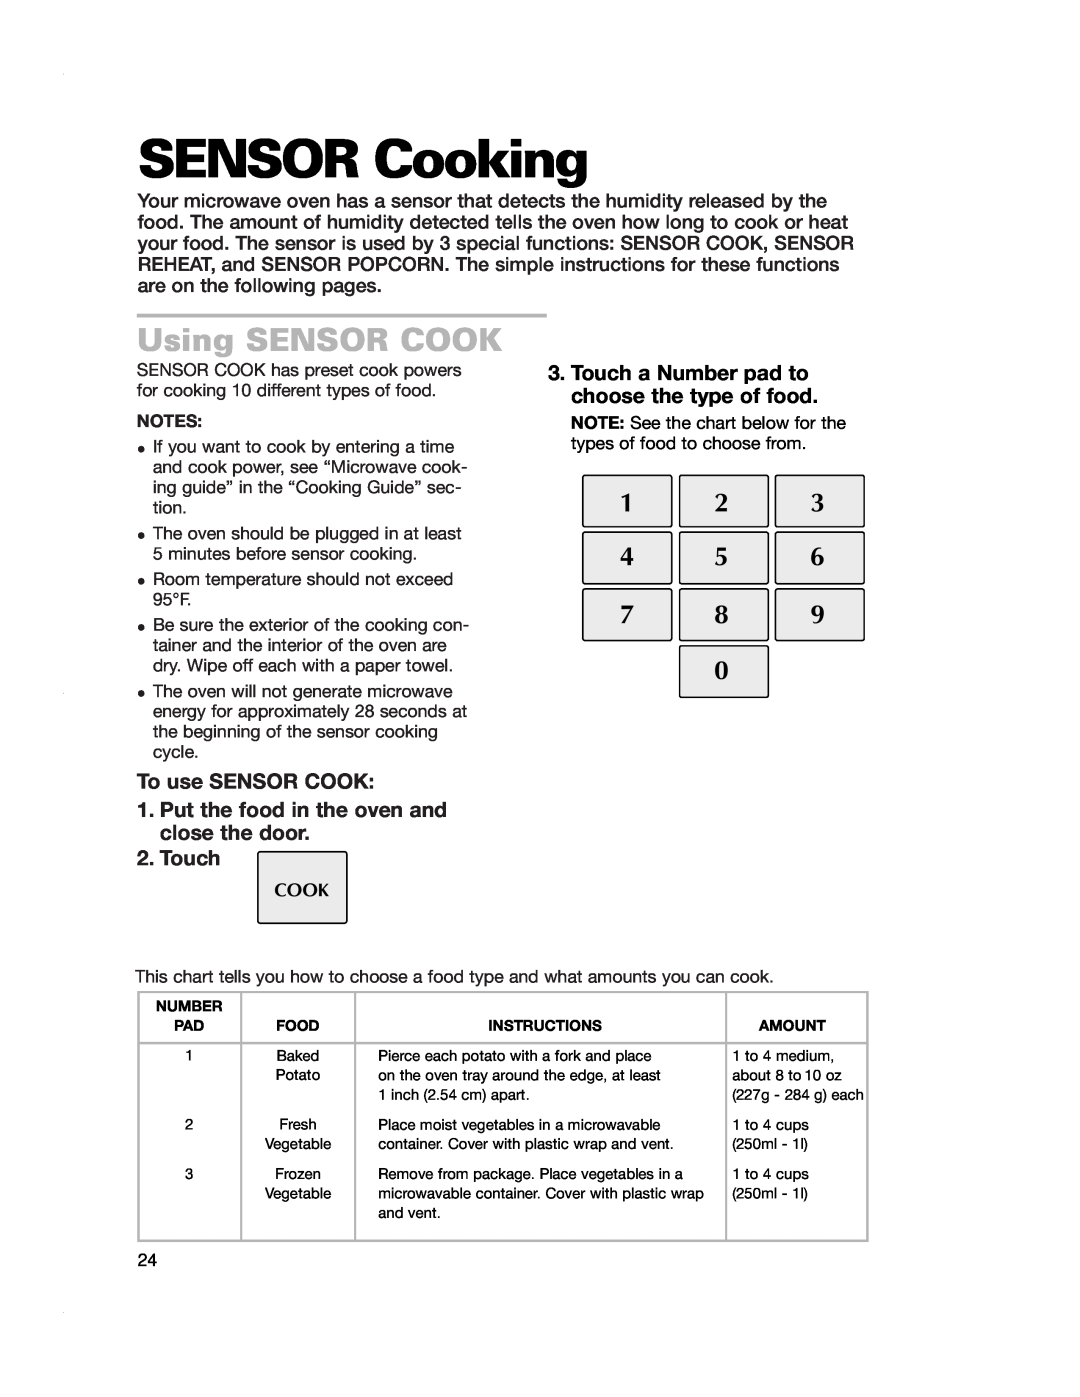 Crosley CMT135SG SENSOR Cooking, Using SENSOR COOK, Touch a Number pad to choose the type of food, To use SENSOR COOK 